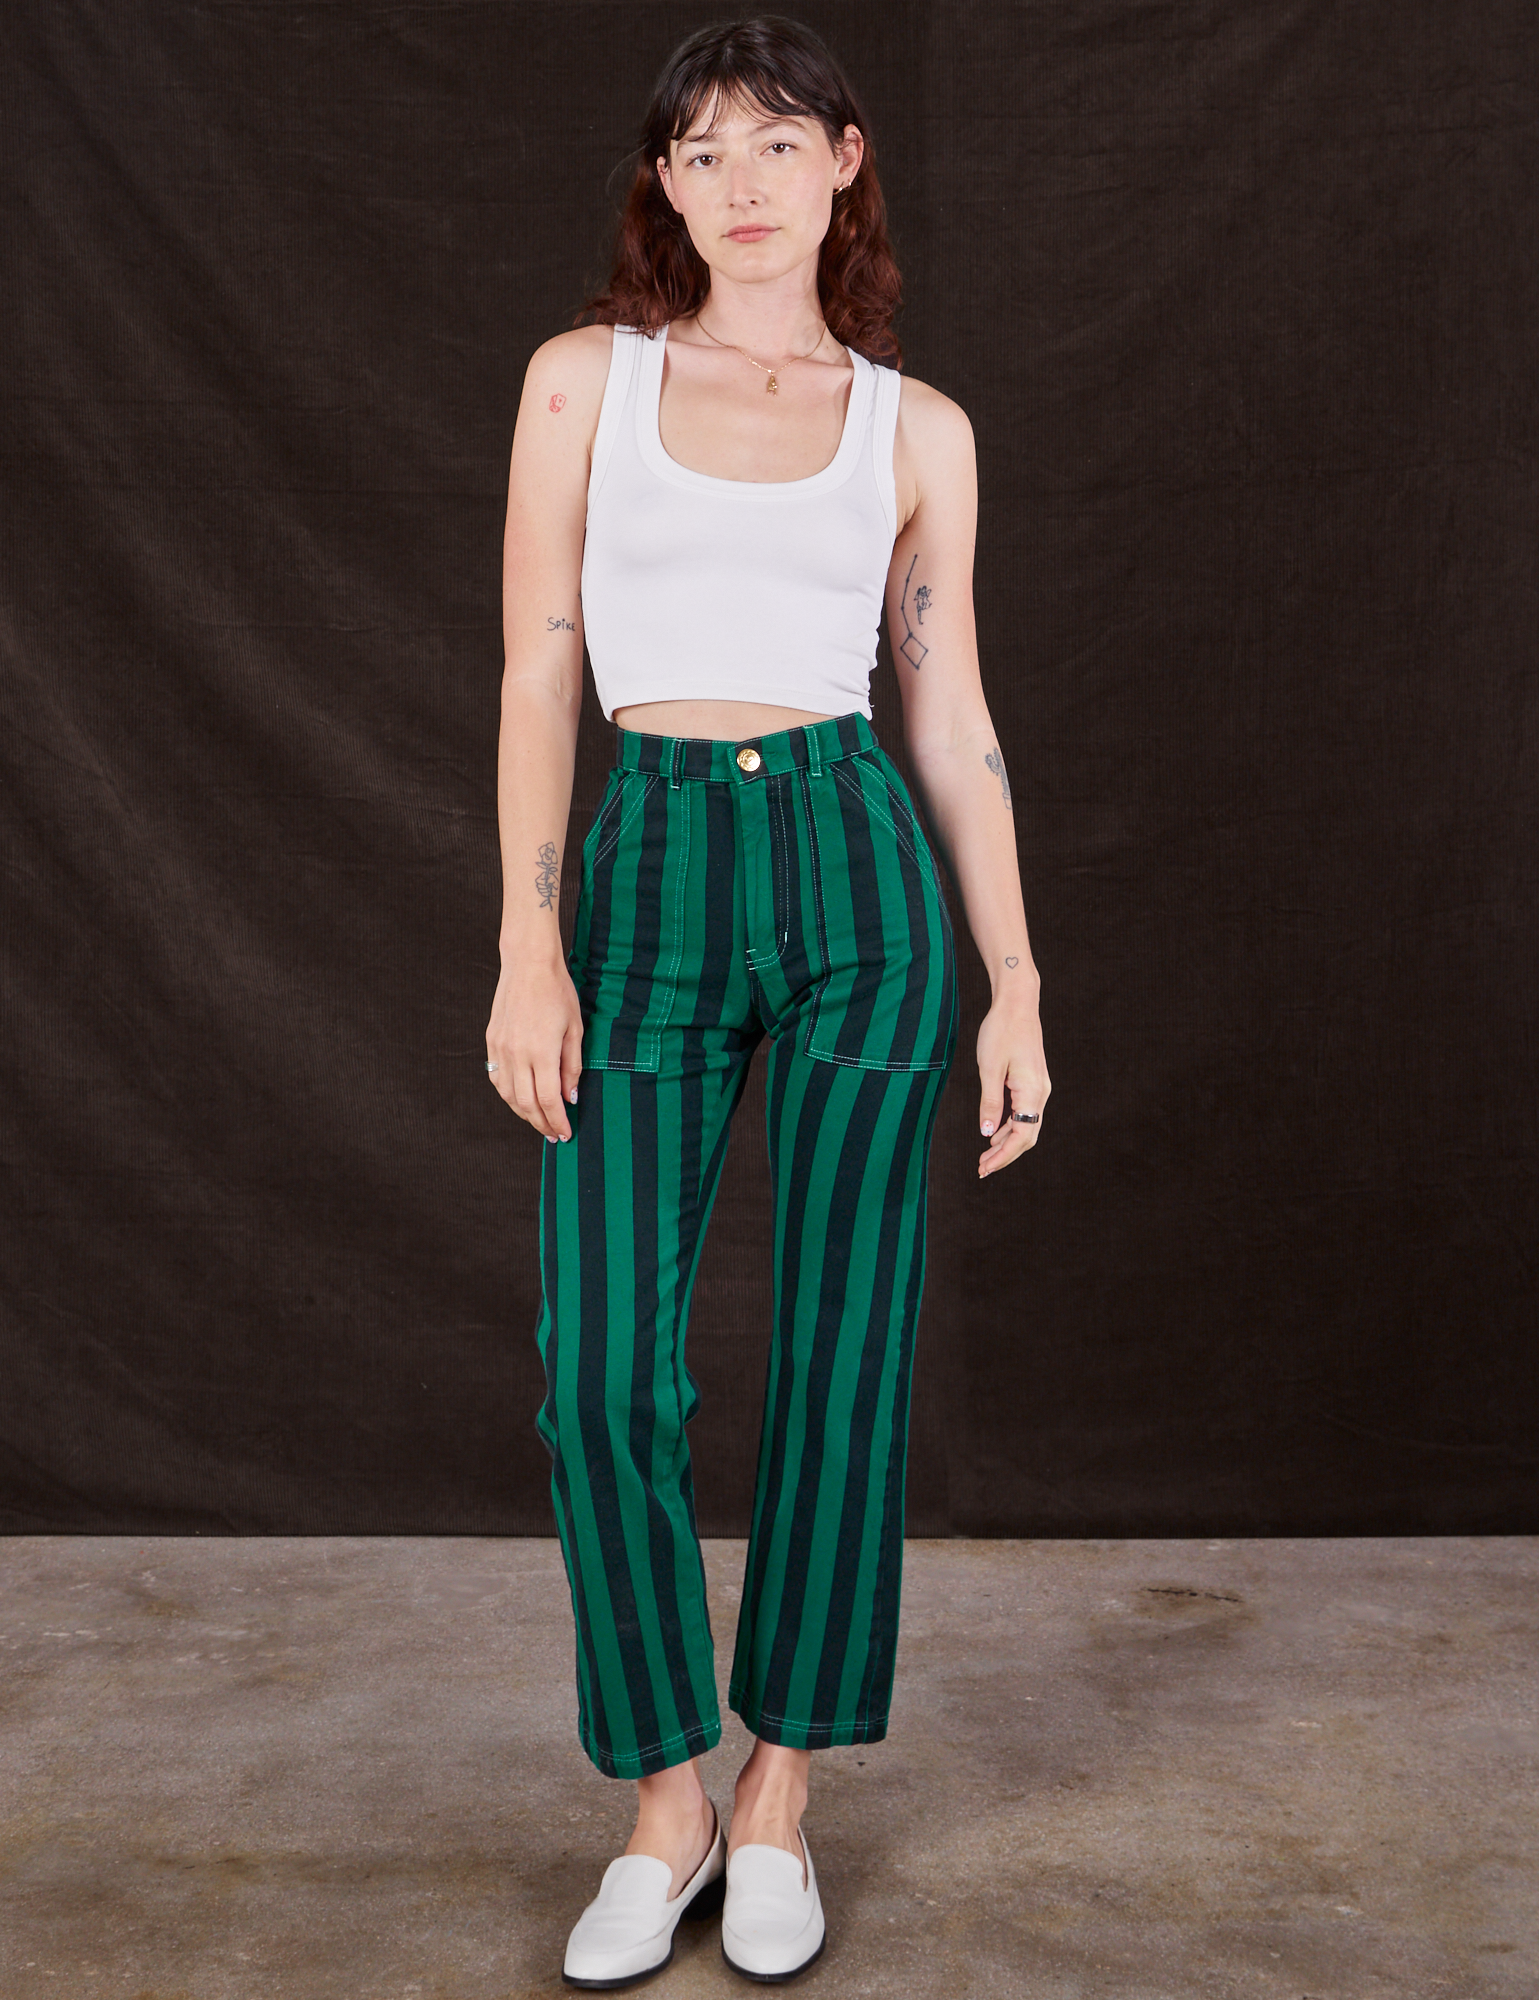 Alex is 5&#39;8&quot; and wearing XS Black Stripe Work Pants in Hunter paired with vintage off-white Cropped Tank Top